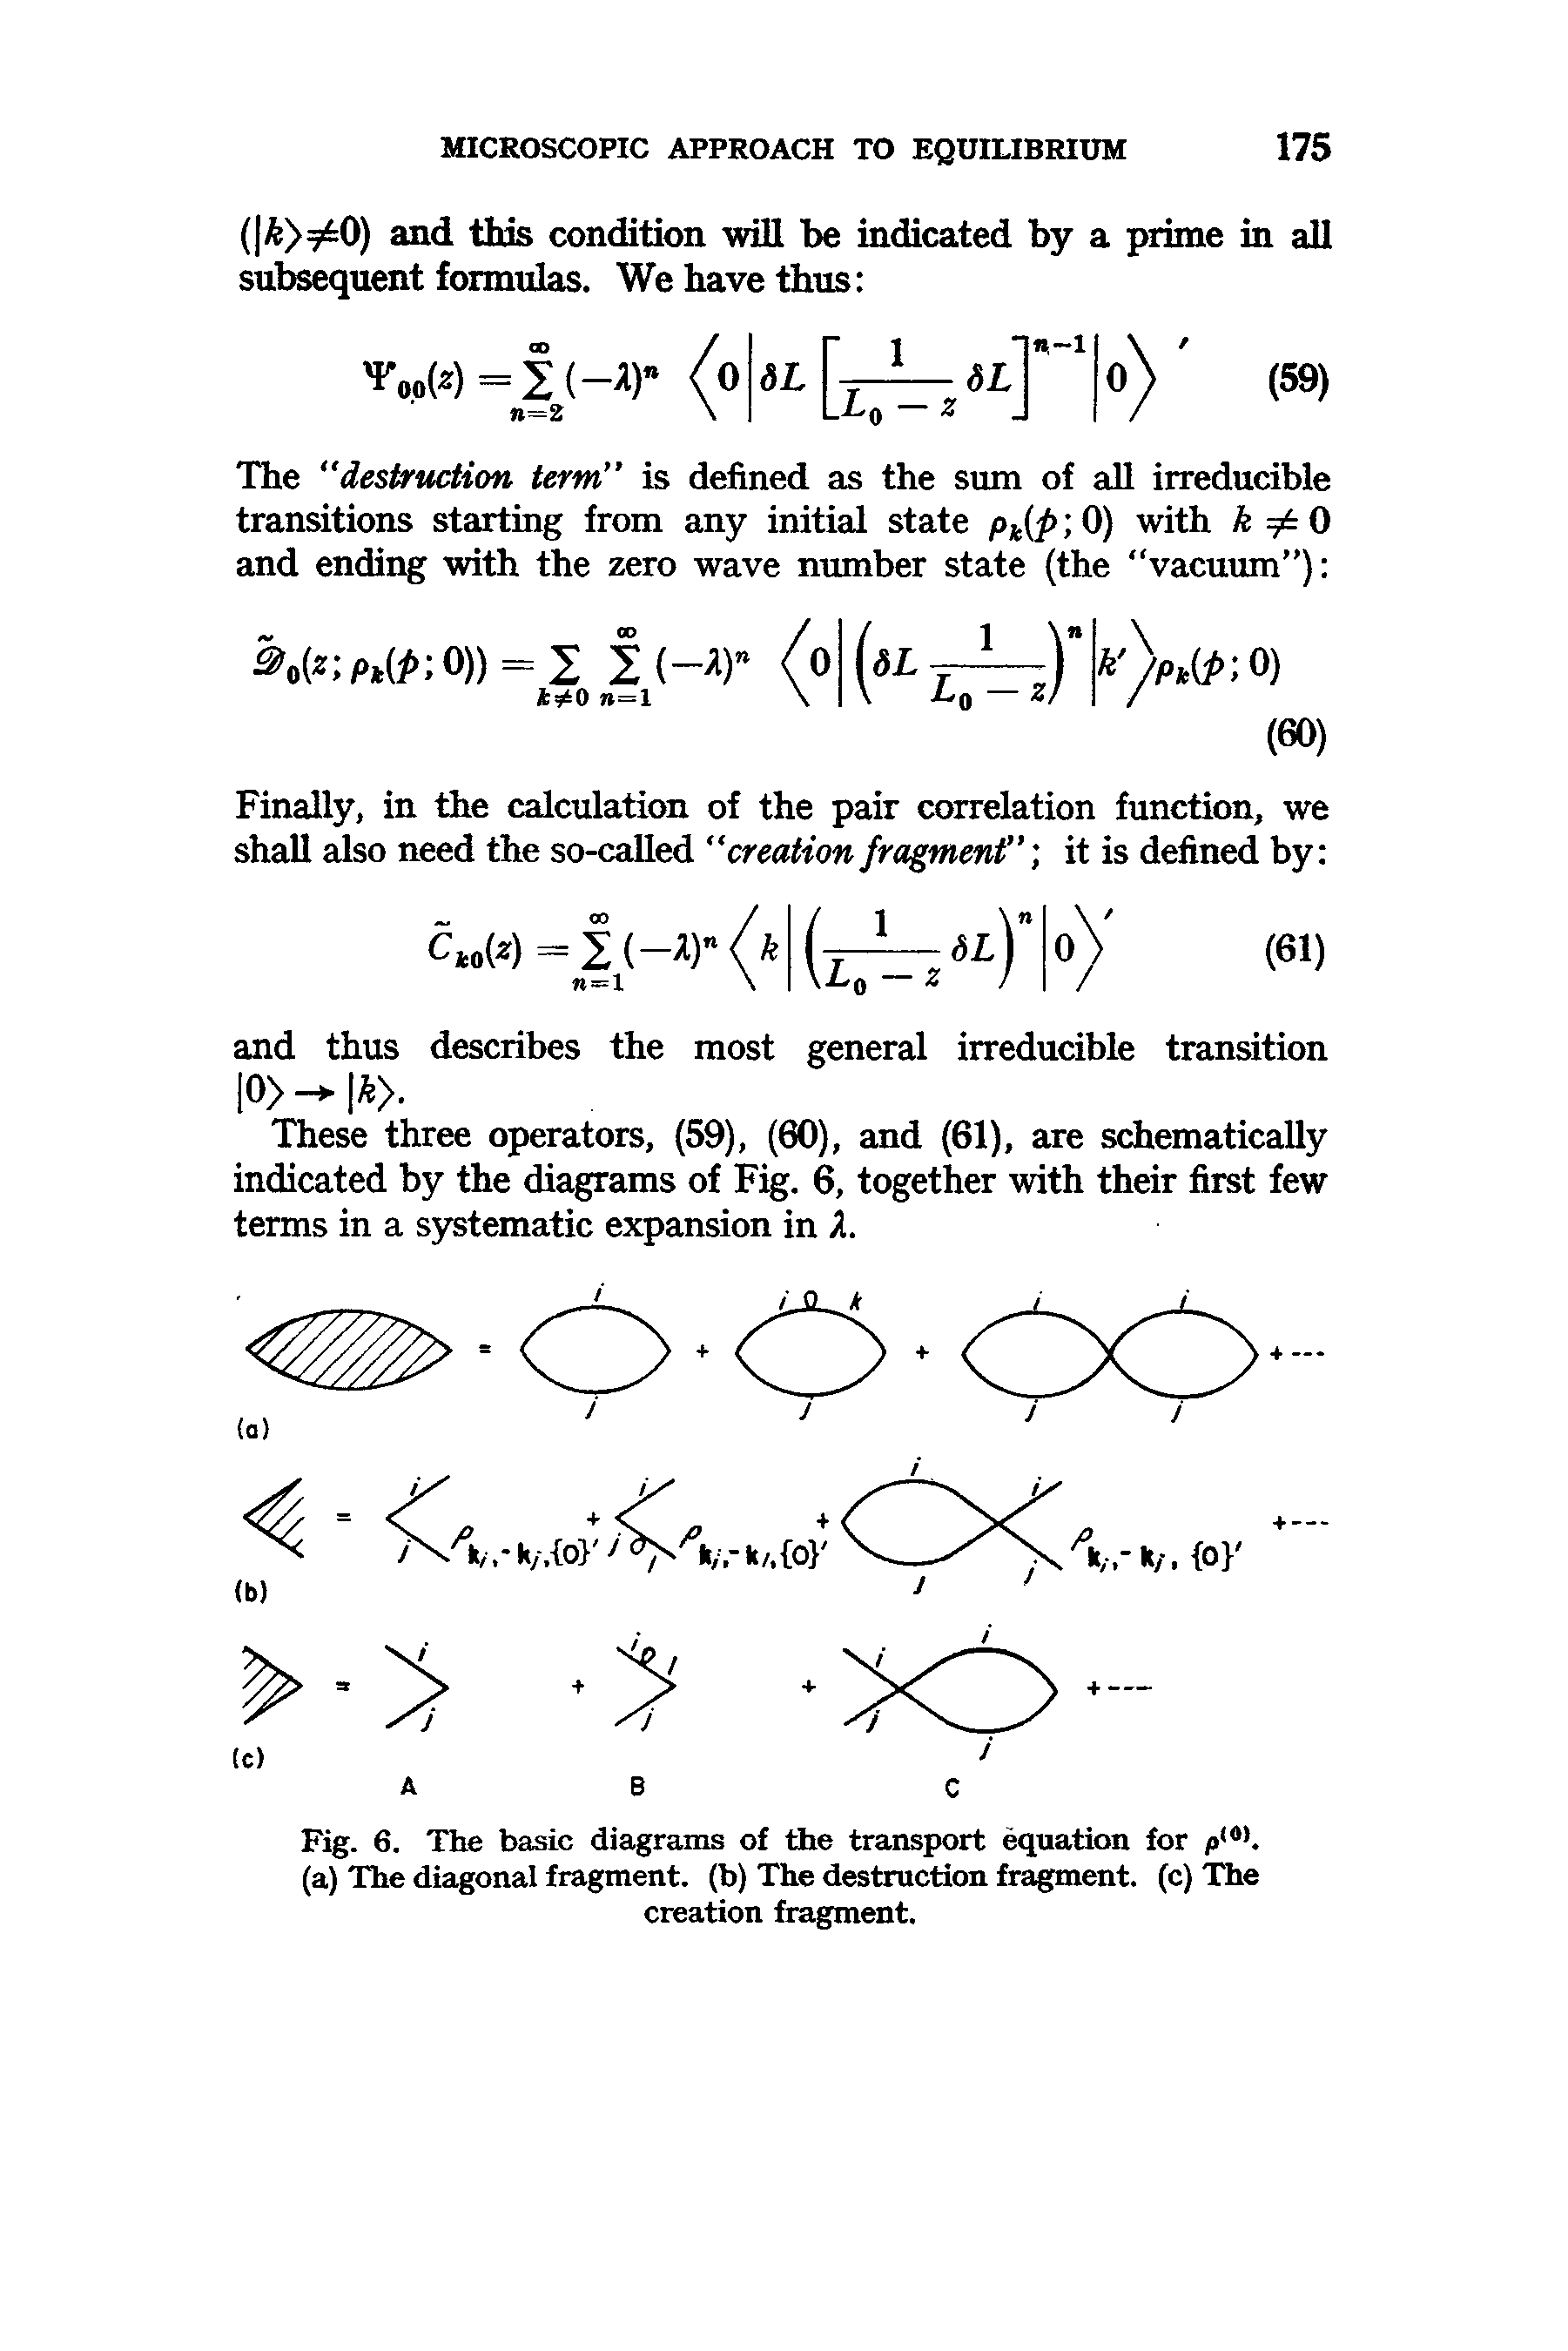 Fig. 6. The basic diagrams of the transport equation for p,0). (a) The diagonal fragment, (b) The destruction fragment, (c) The creation fragment.